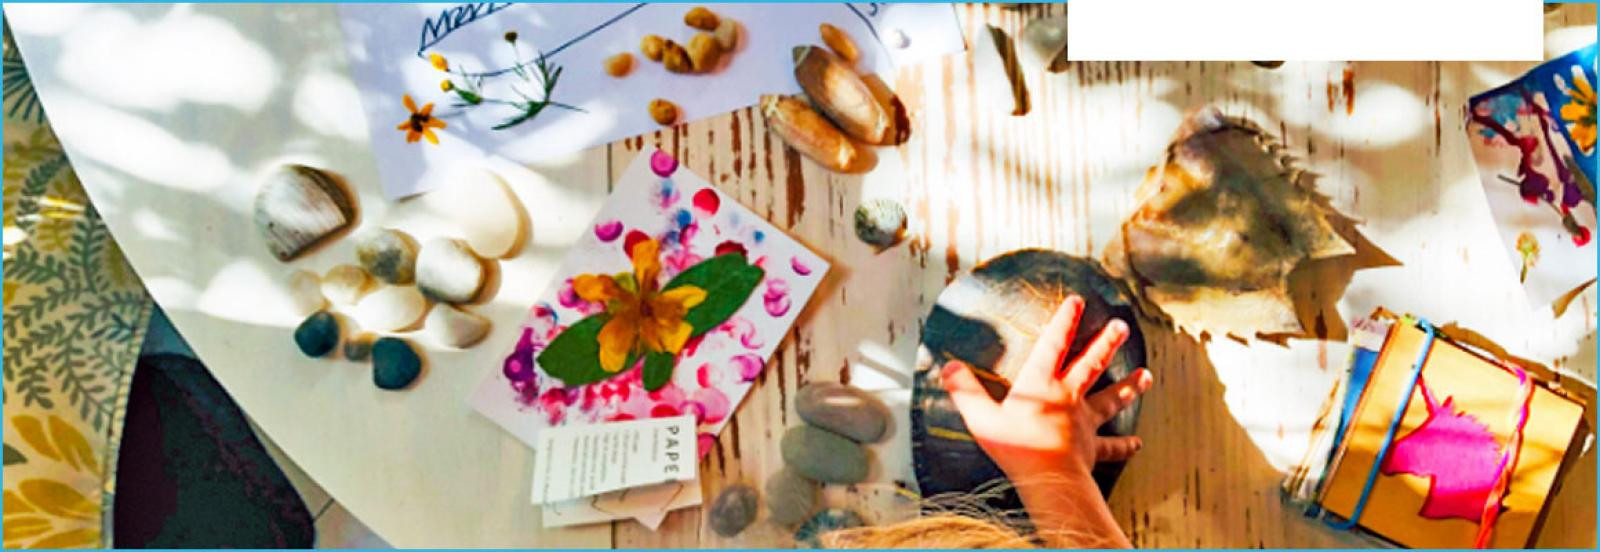 Clickable image of a child''s hand on a table full of craft materials.